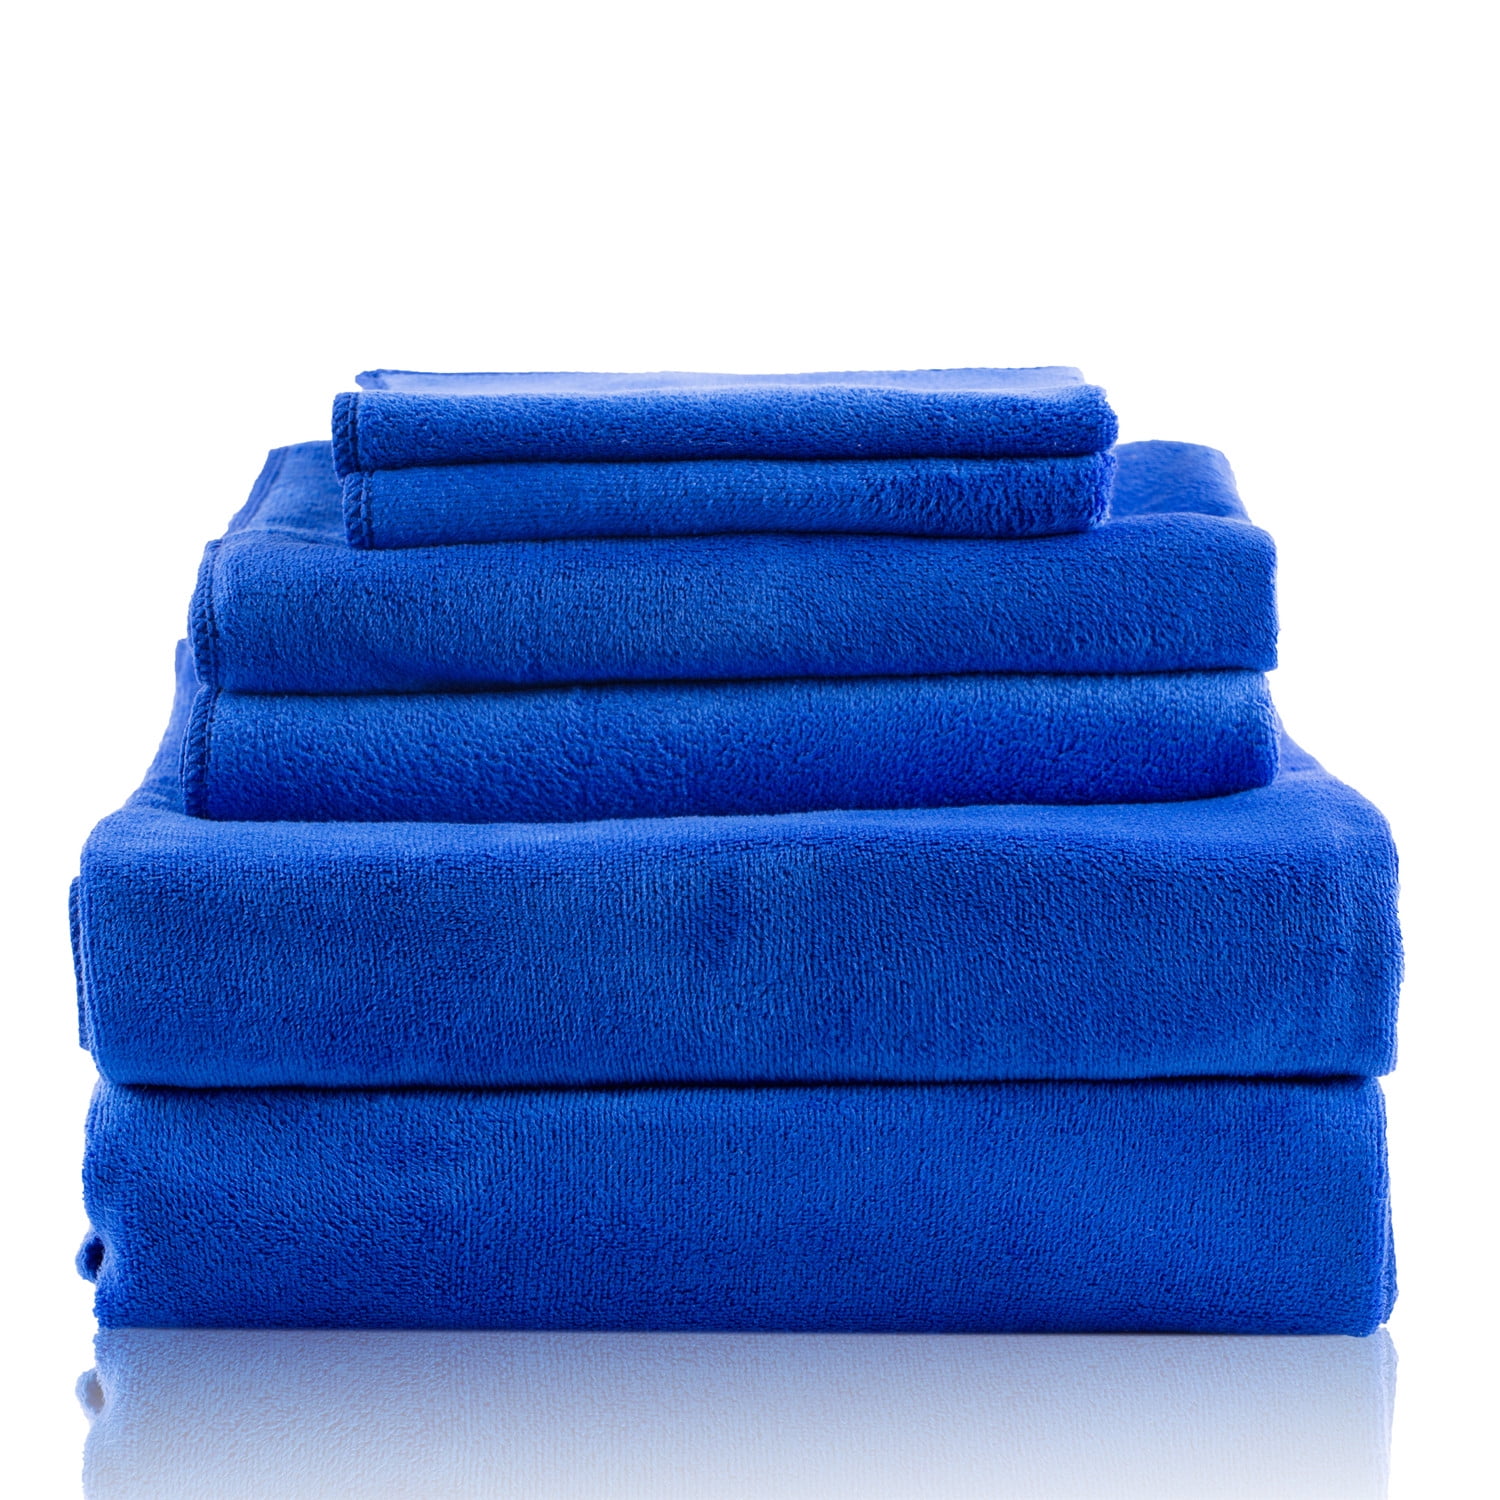 JML Microfiber Bath Towel 2 Pack(30 x 60), Oversized Thick Towels, Soft,  Super Absorbent and Fast Drying, No Fading Multipurpose Use for Sports